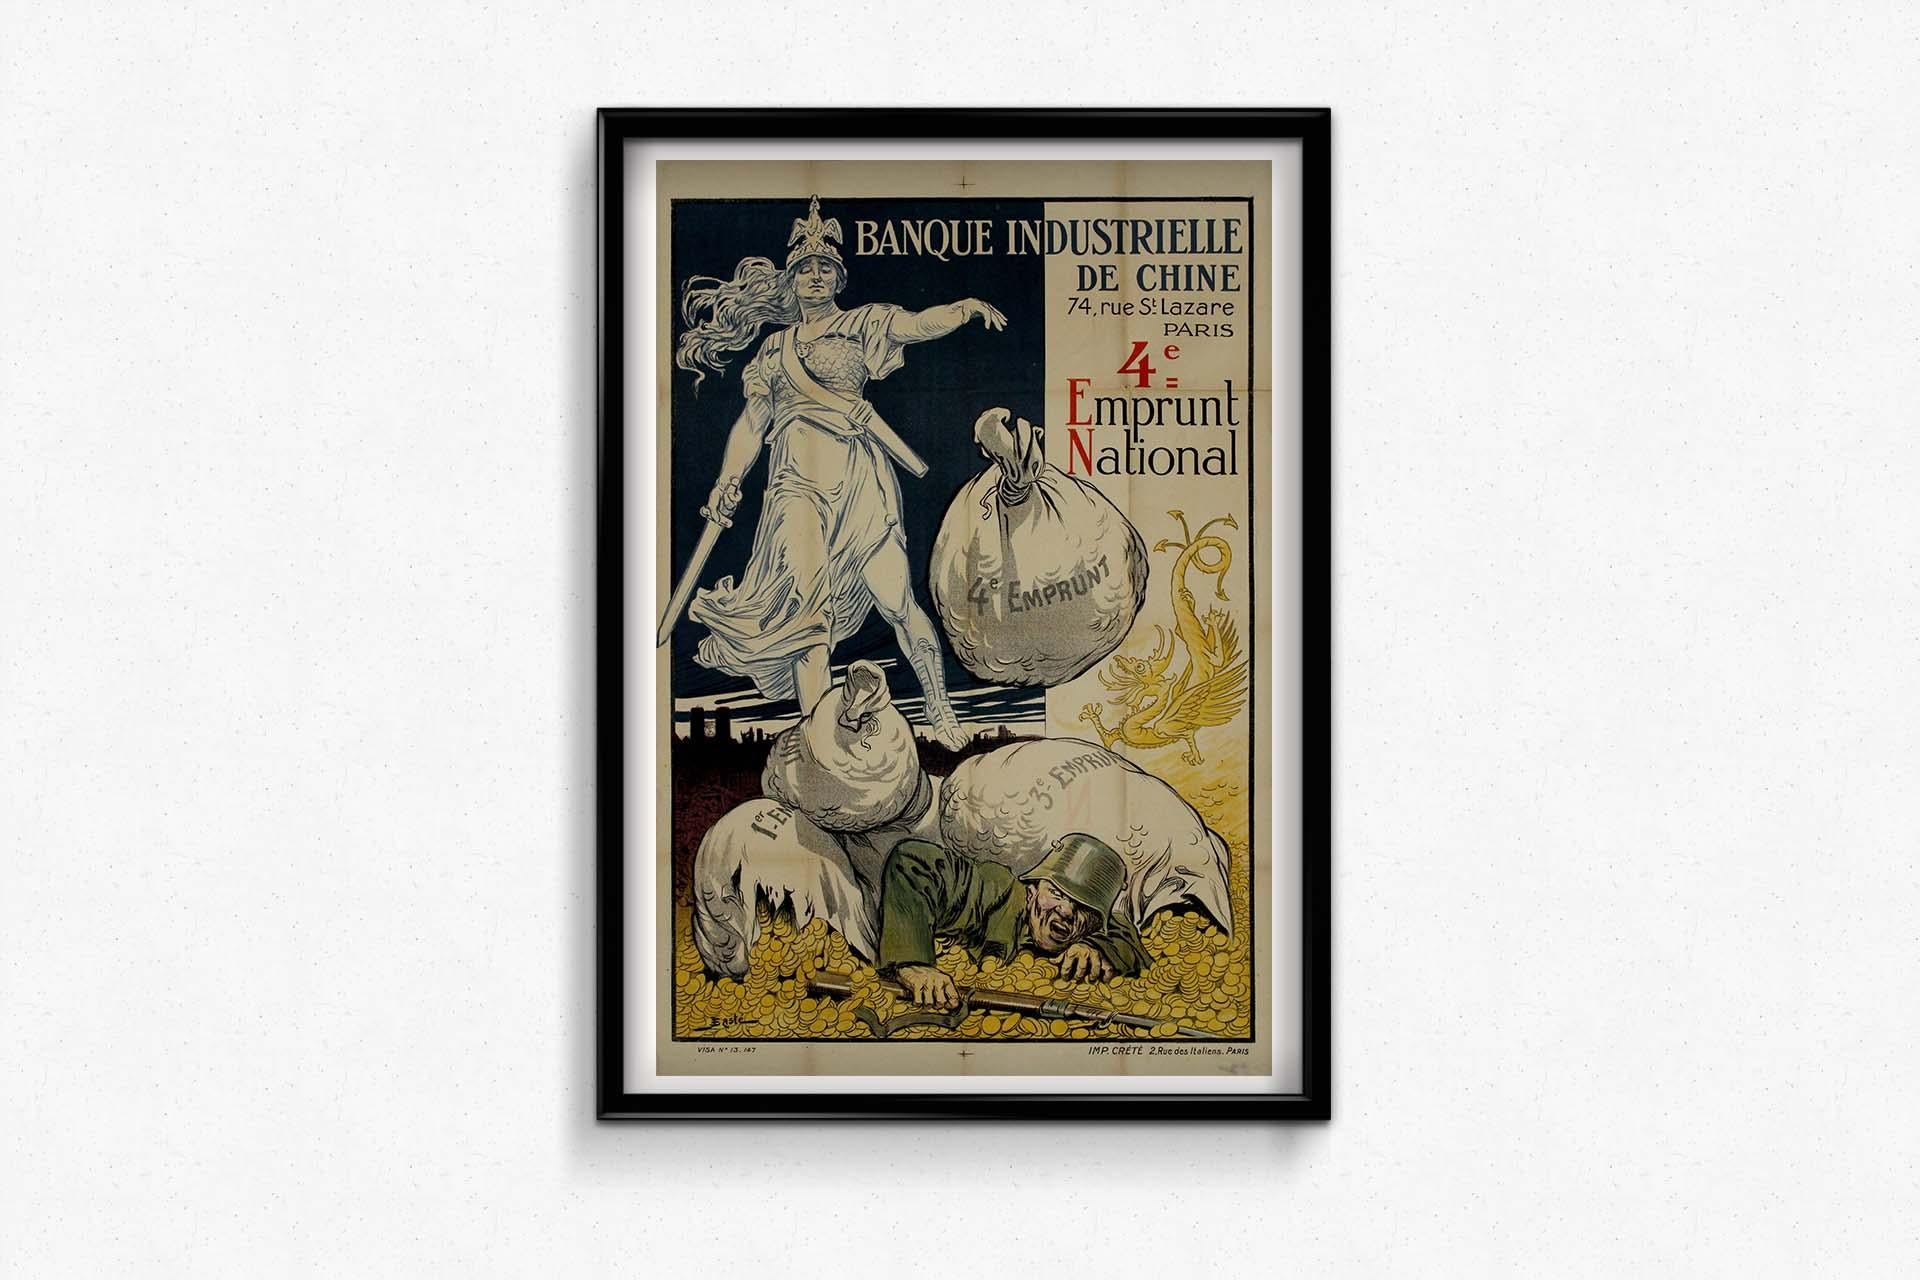 The original poster by J. Basté in 1918, promoting the 4th national loan for the Banque Industrielle de Chine, stands as a testament to the financial mobilization efforts during World War I.
In the midst of the conflict, governments and financial